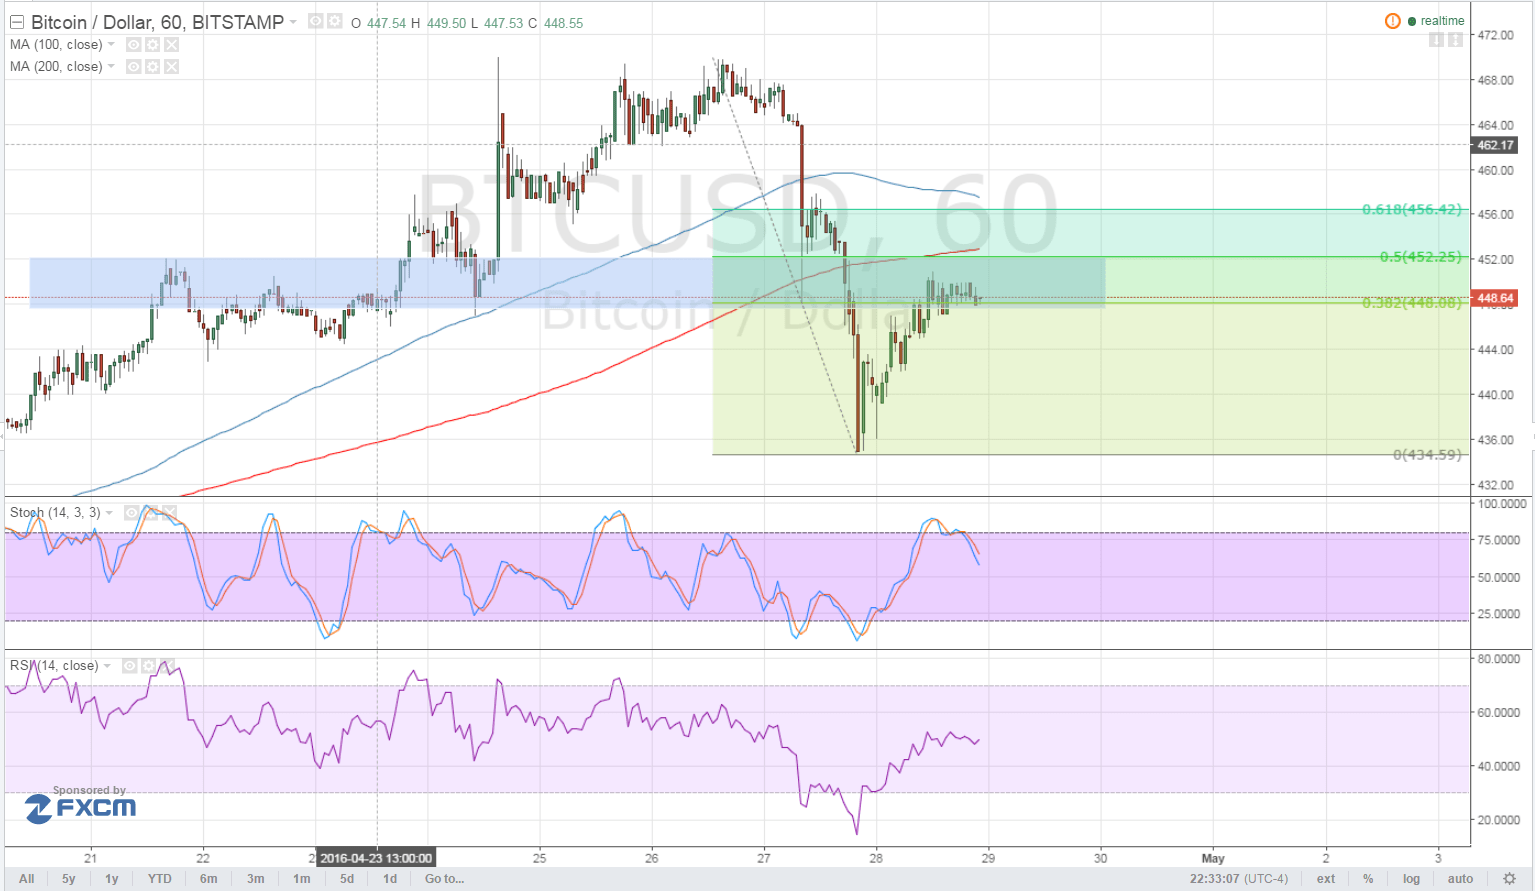 Bitcoin Price Technical Analysis for 04/29/2016 - Bears Getting Stronger?